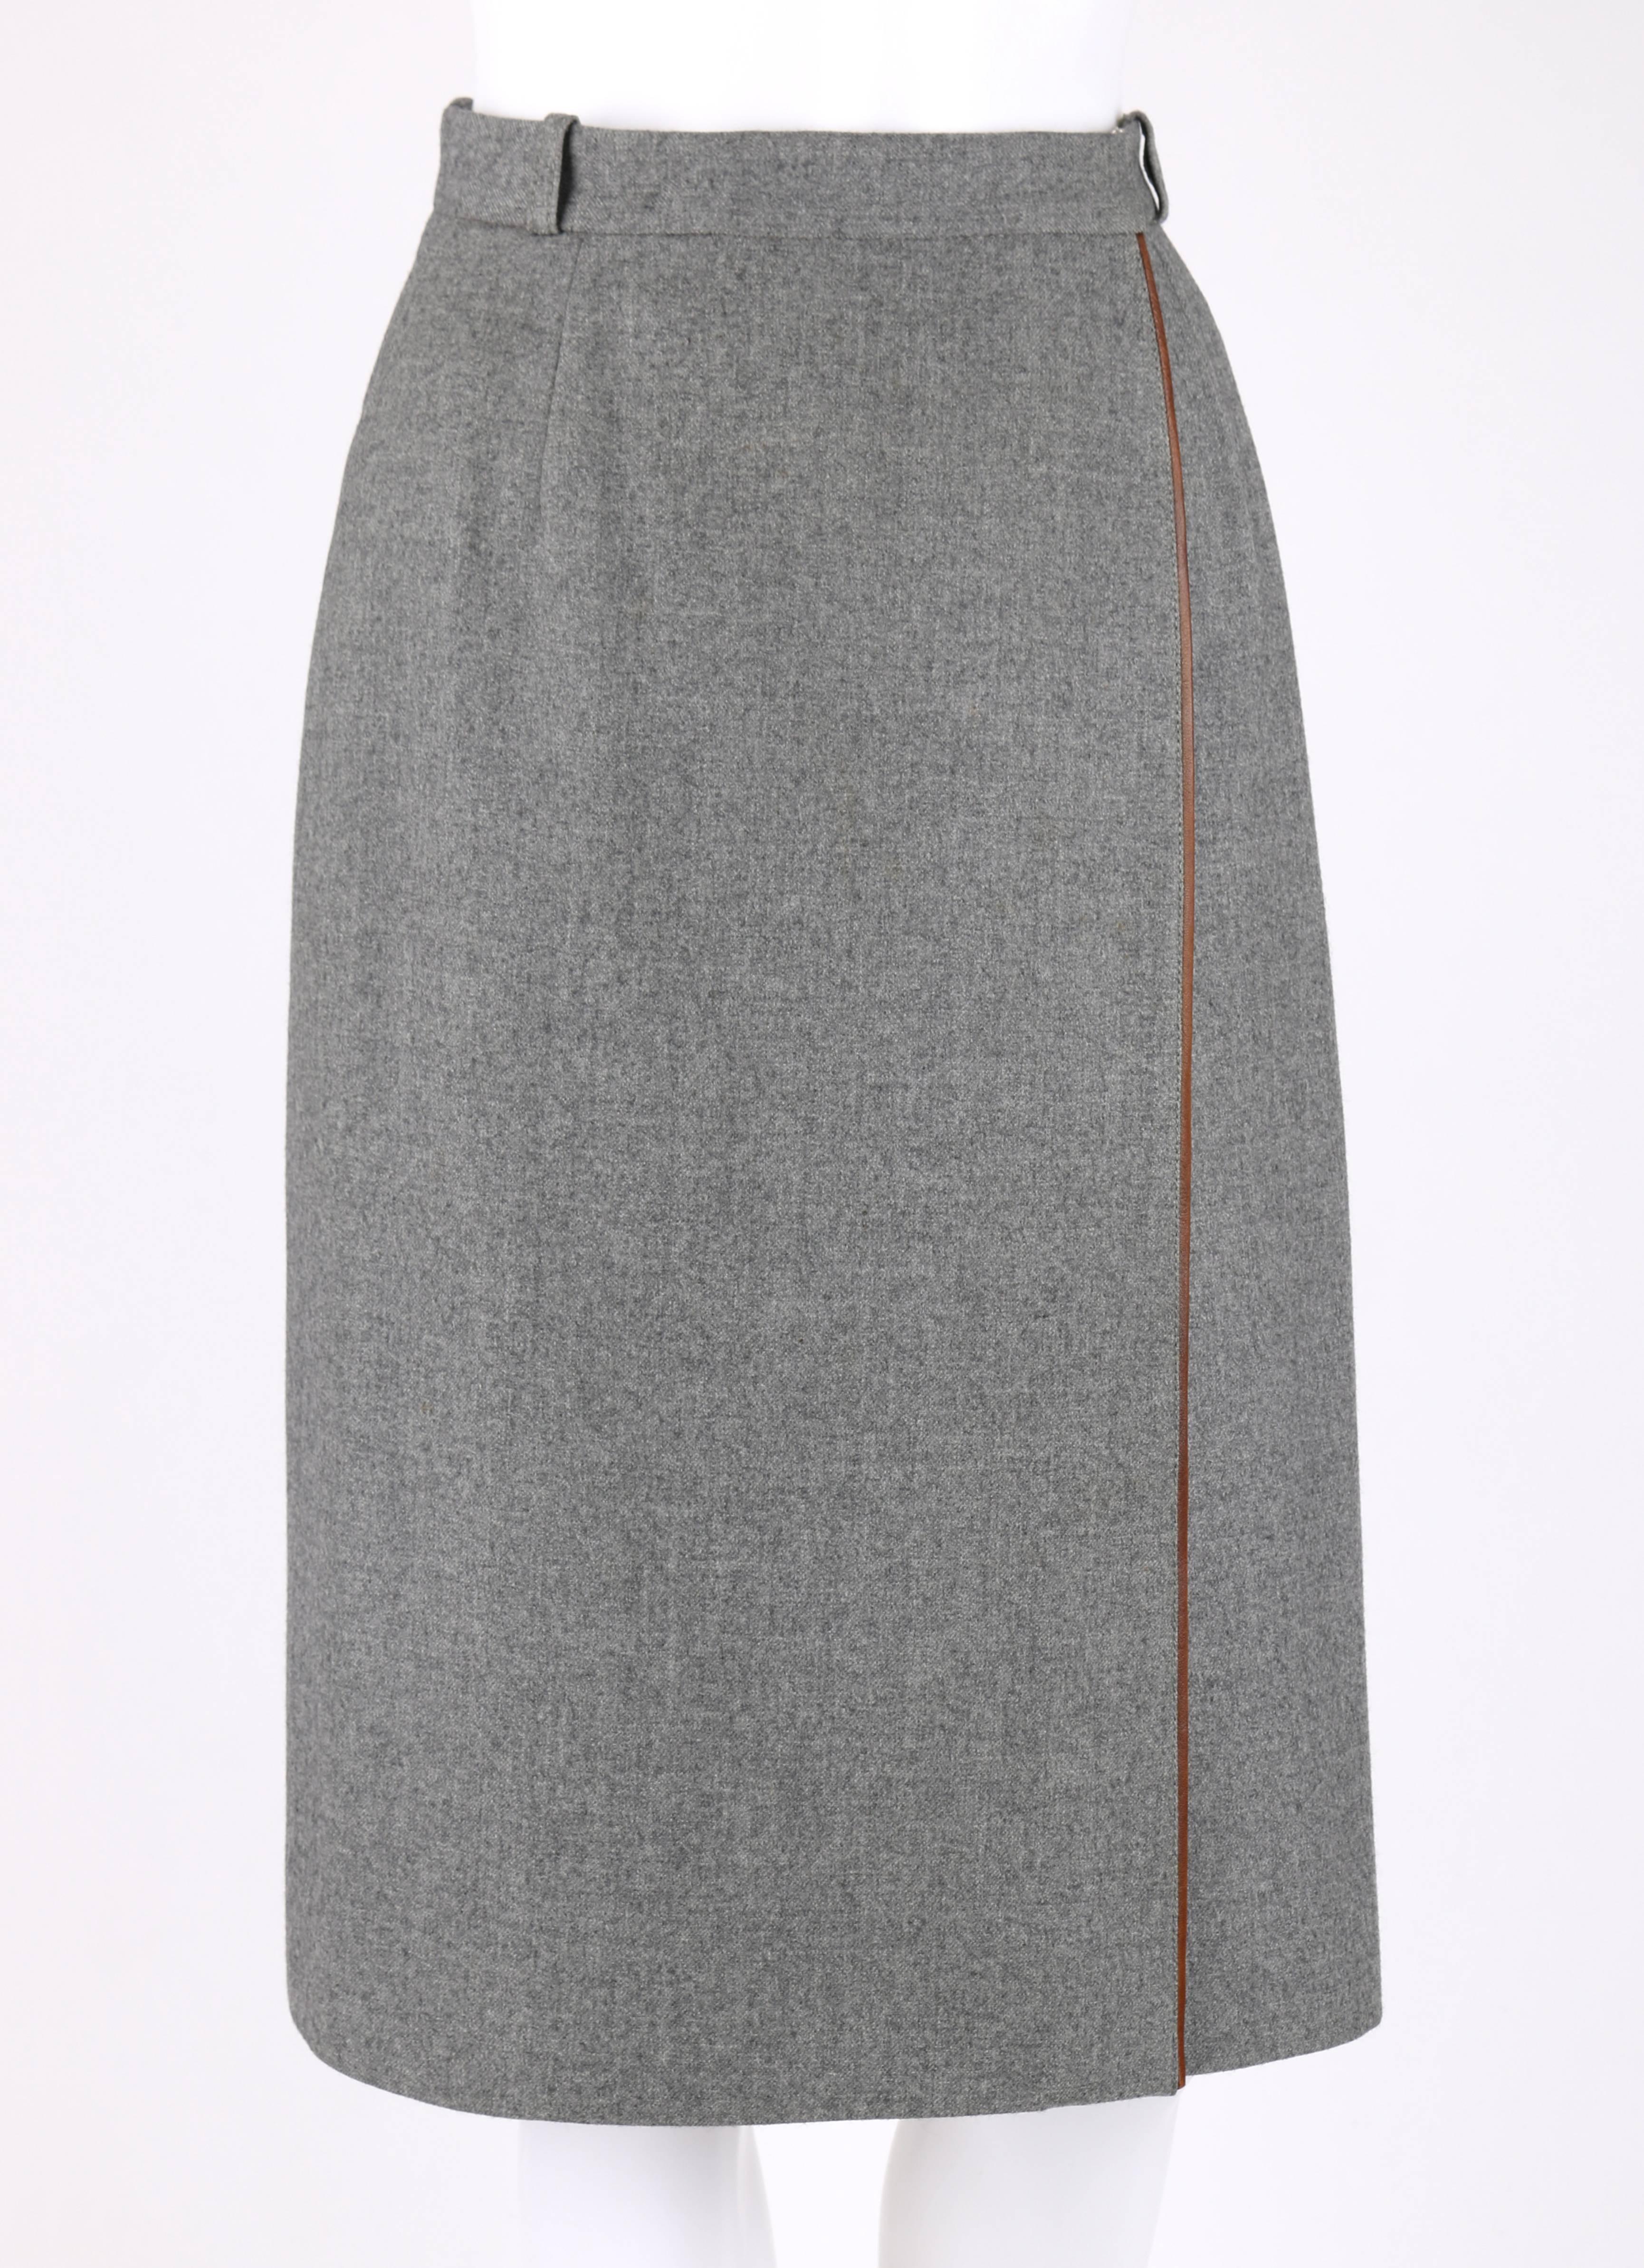 Vintage Gucci c.1970's gray wool wrap skirt. Four belt loops. Brown leather piping detail. Front wrap design with hook and bar and single button closures. Front and back waistline darts. Fully lined. Marked Fabric Content: 